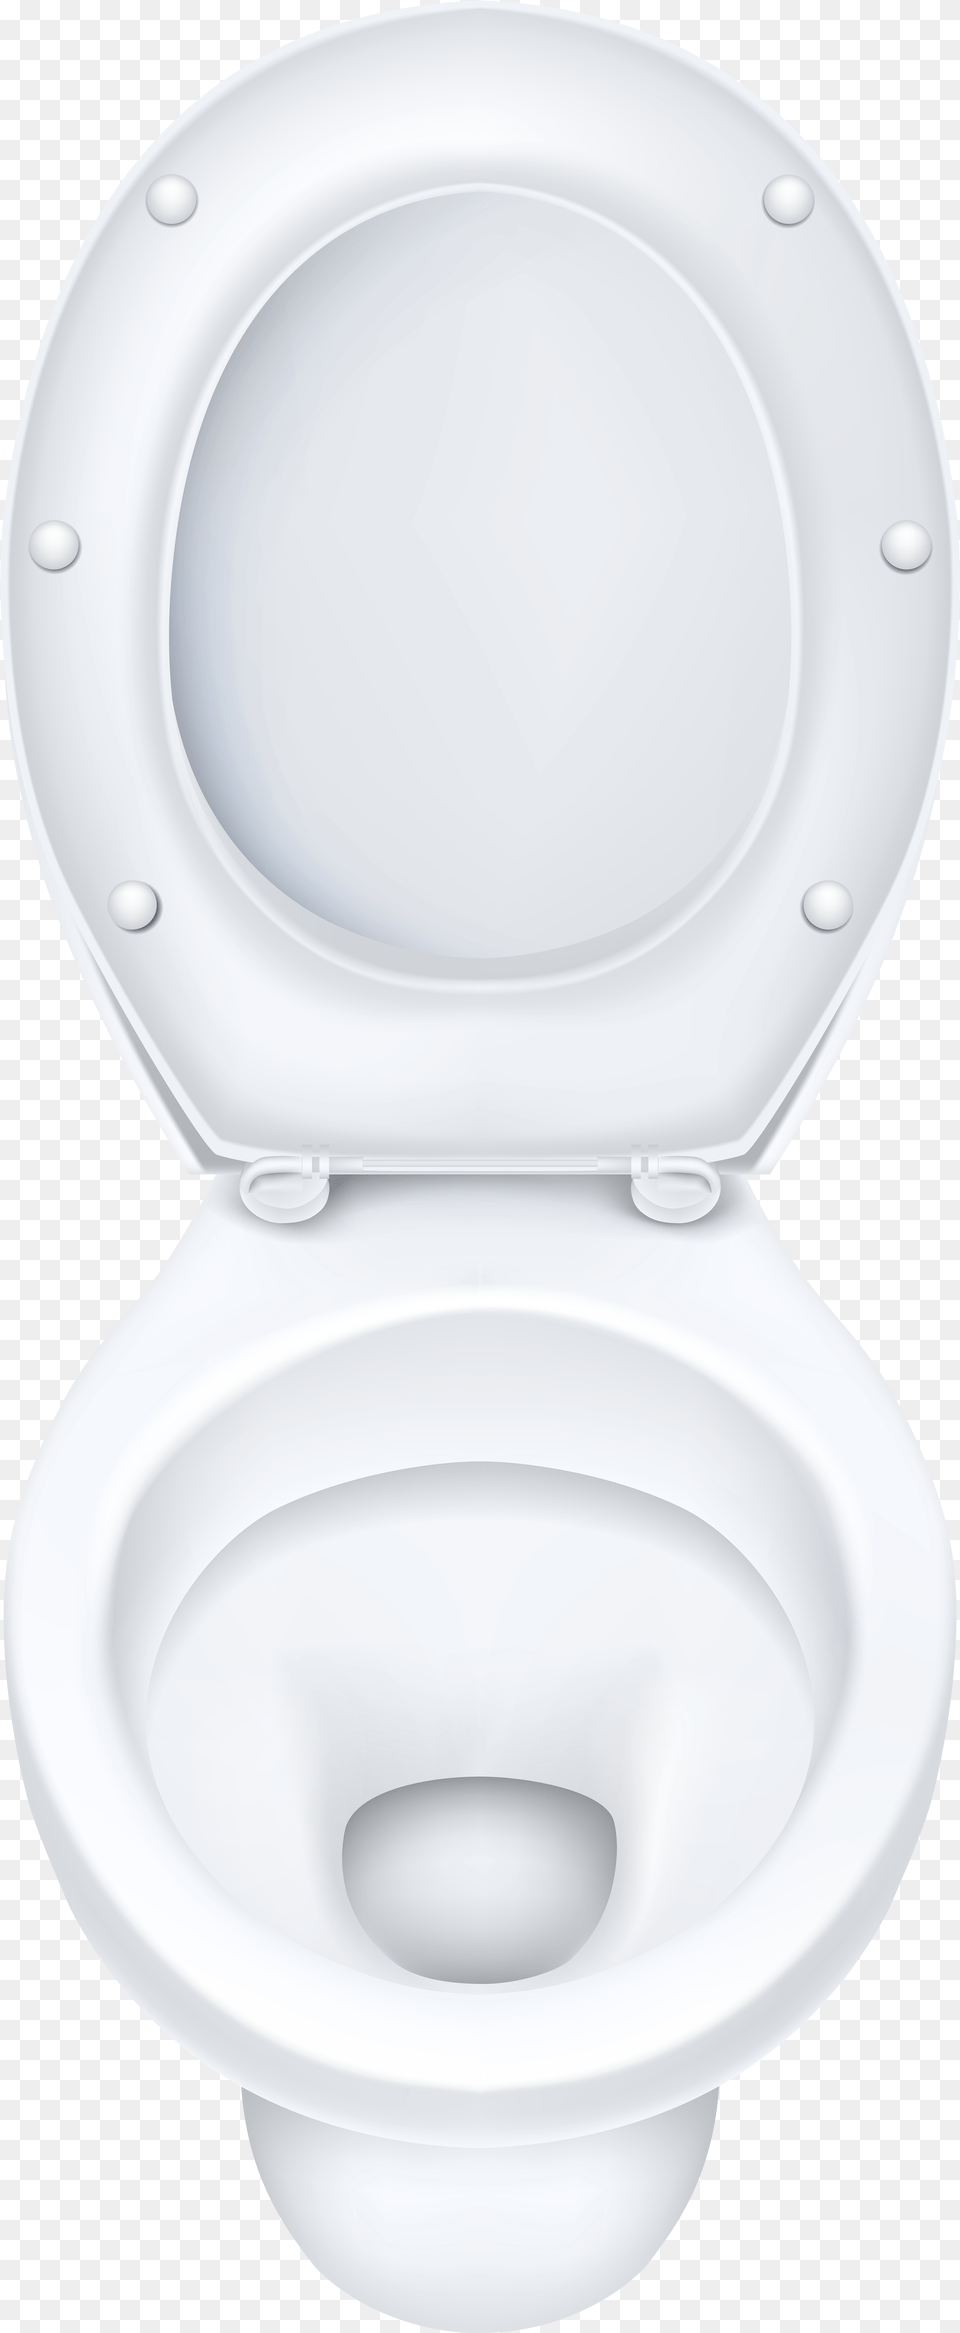 Library Of Toilet Bowl Jpg Transparent Toilet Seat, Indoors, Bathroom, Room Png Image